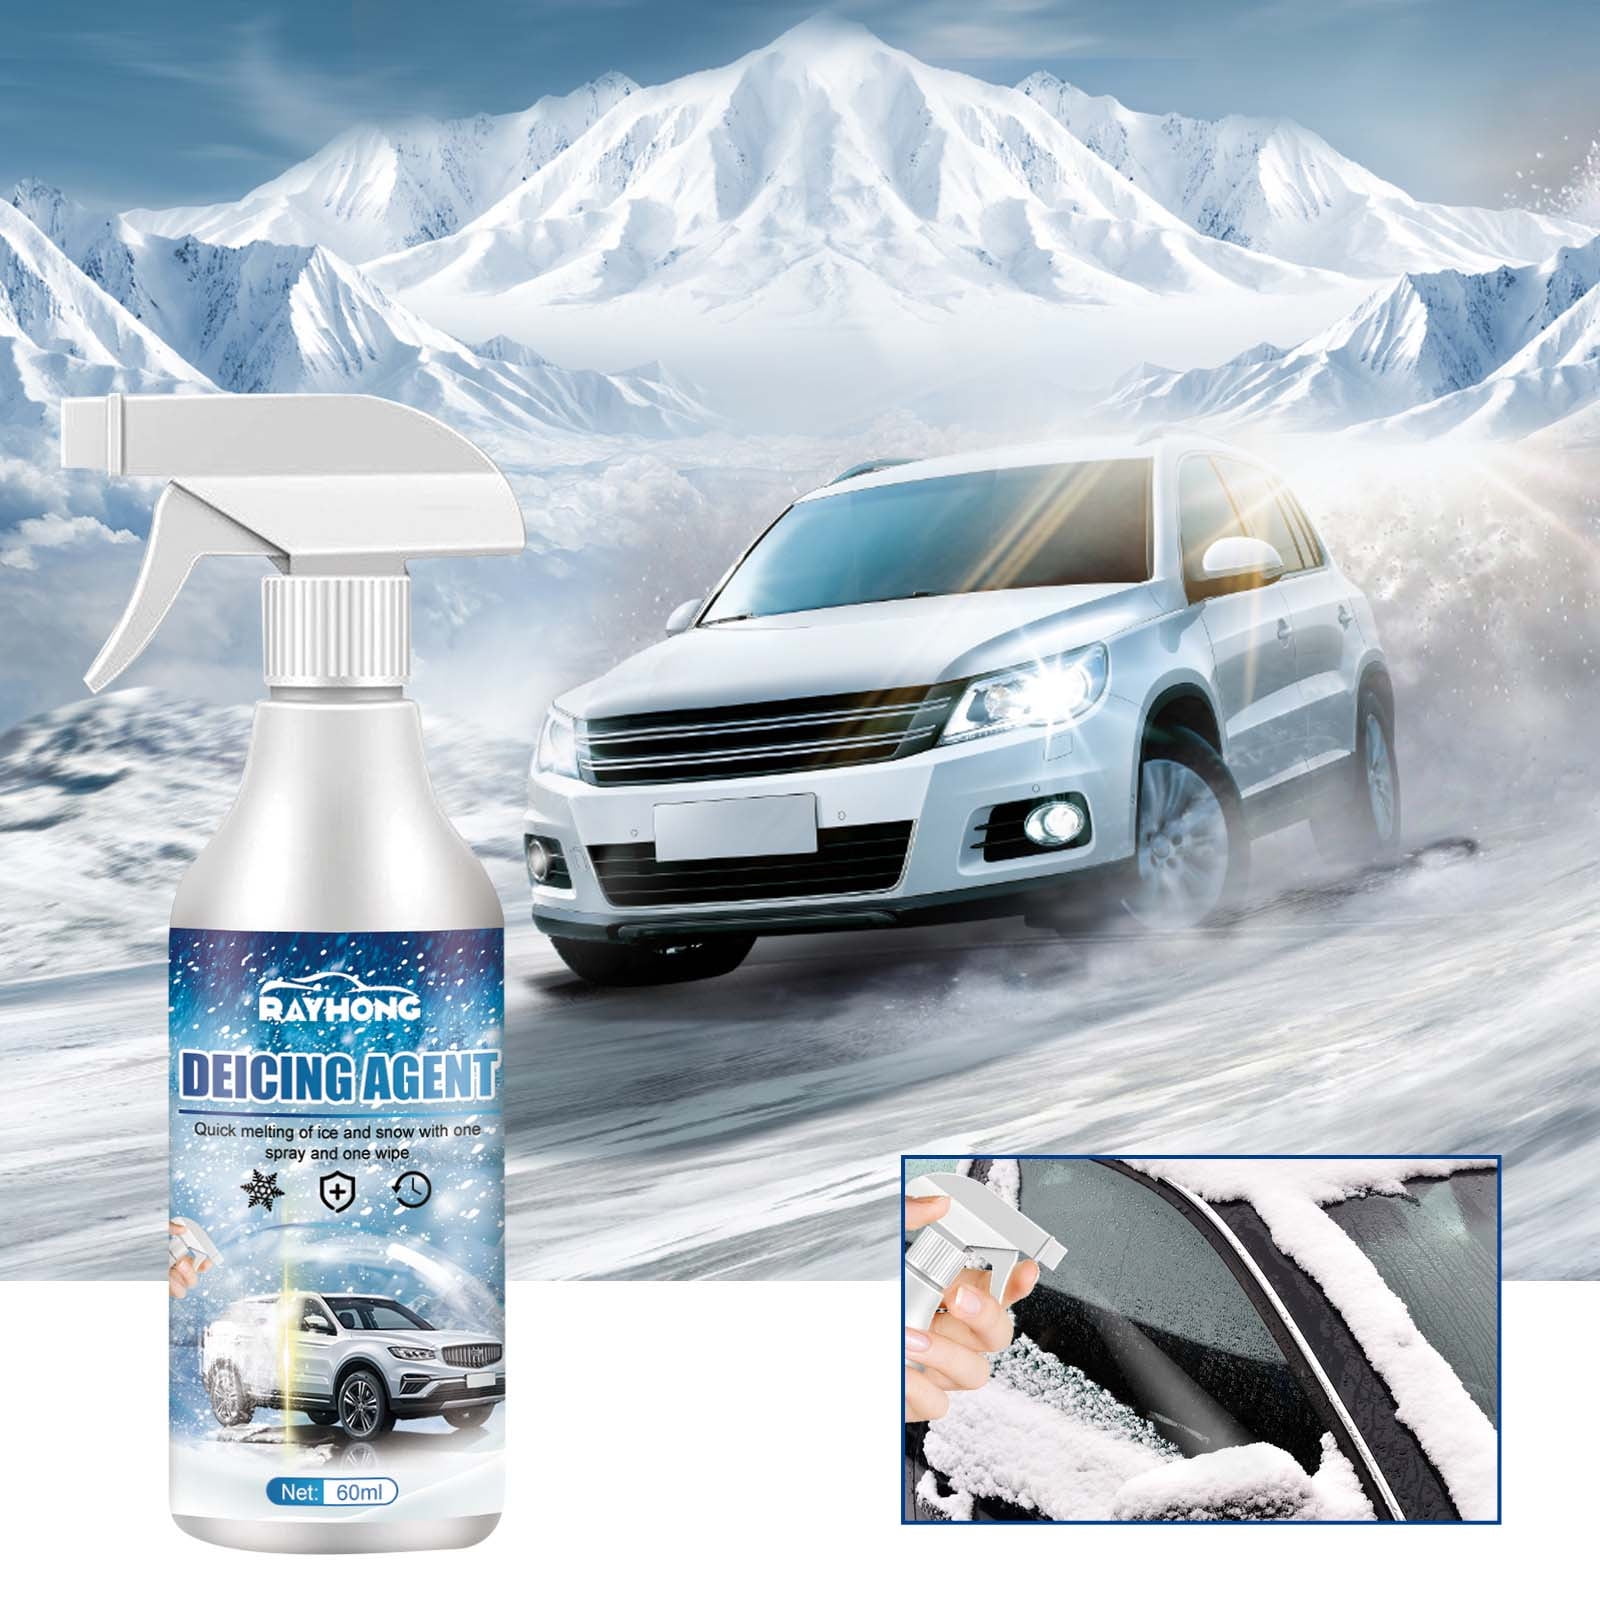 ikasus Auto Windshield Deicing Spray Snow Melting Spray Windshield De-Icer,  Fast Ice Melting Spray Defrosting Anti Frost Spray Deicer Spray for Car Windshield  Windows Wipers and Mirrors 60ml - Yahoo Shopping